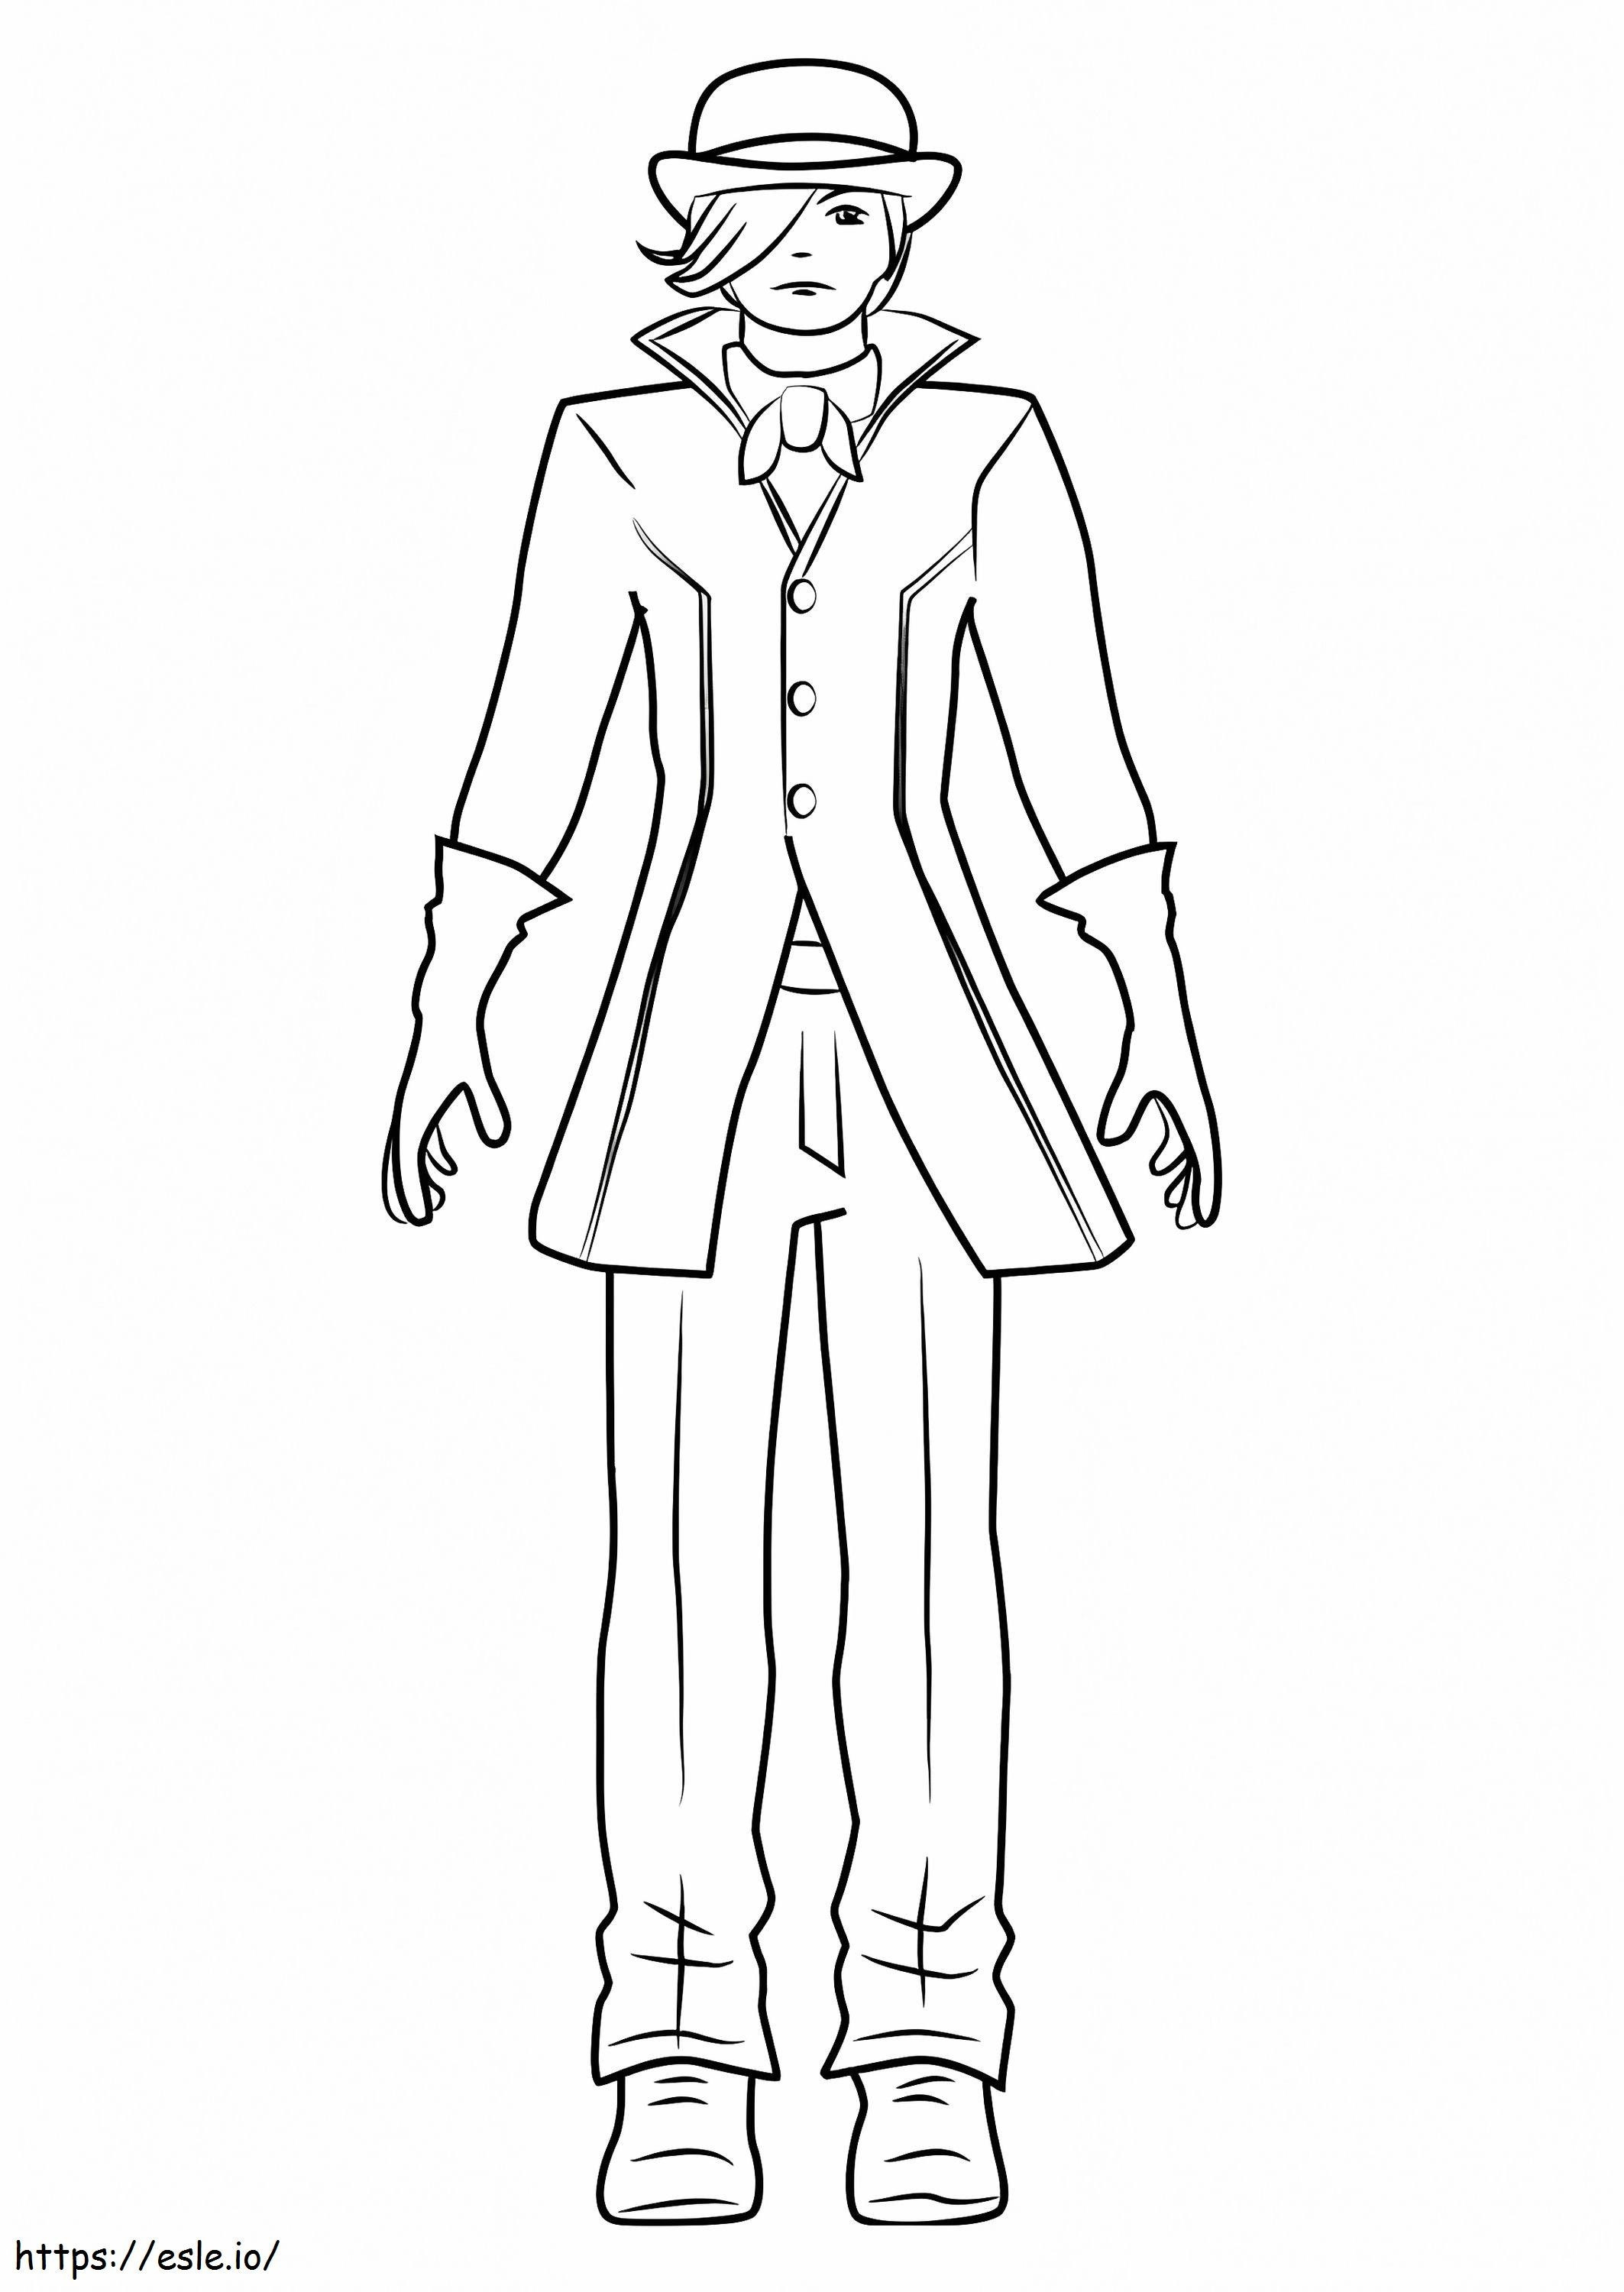 Roman Torchwick From RWBY coloring page